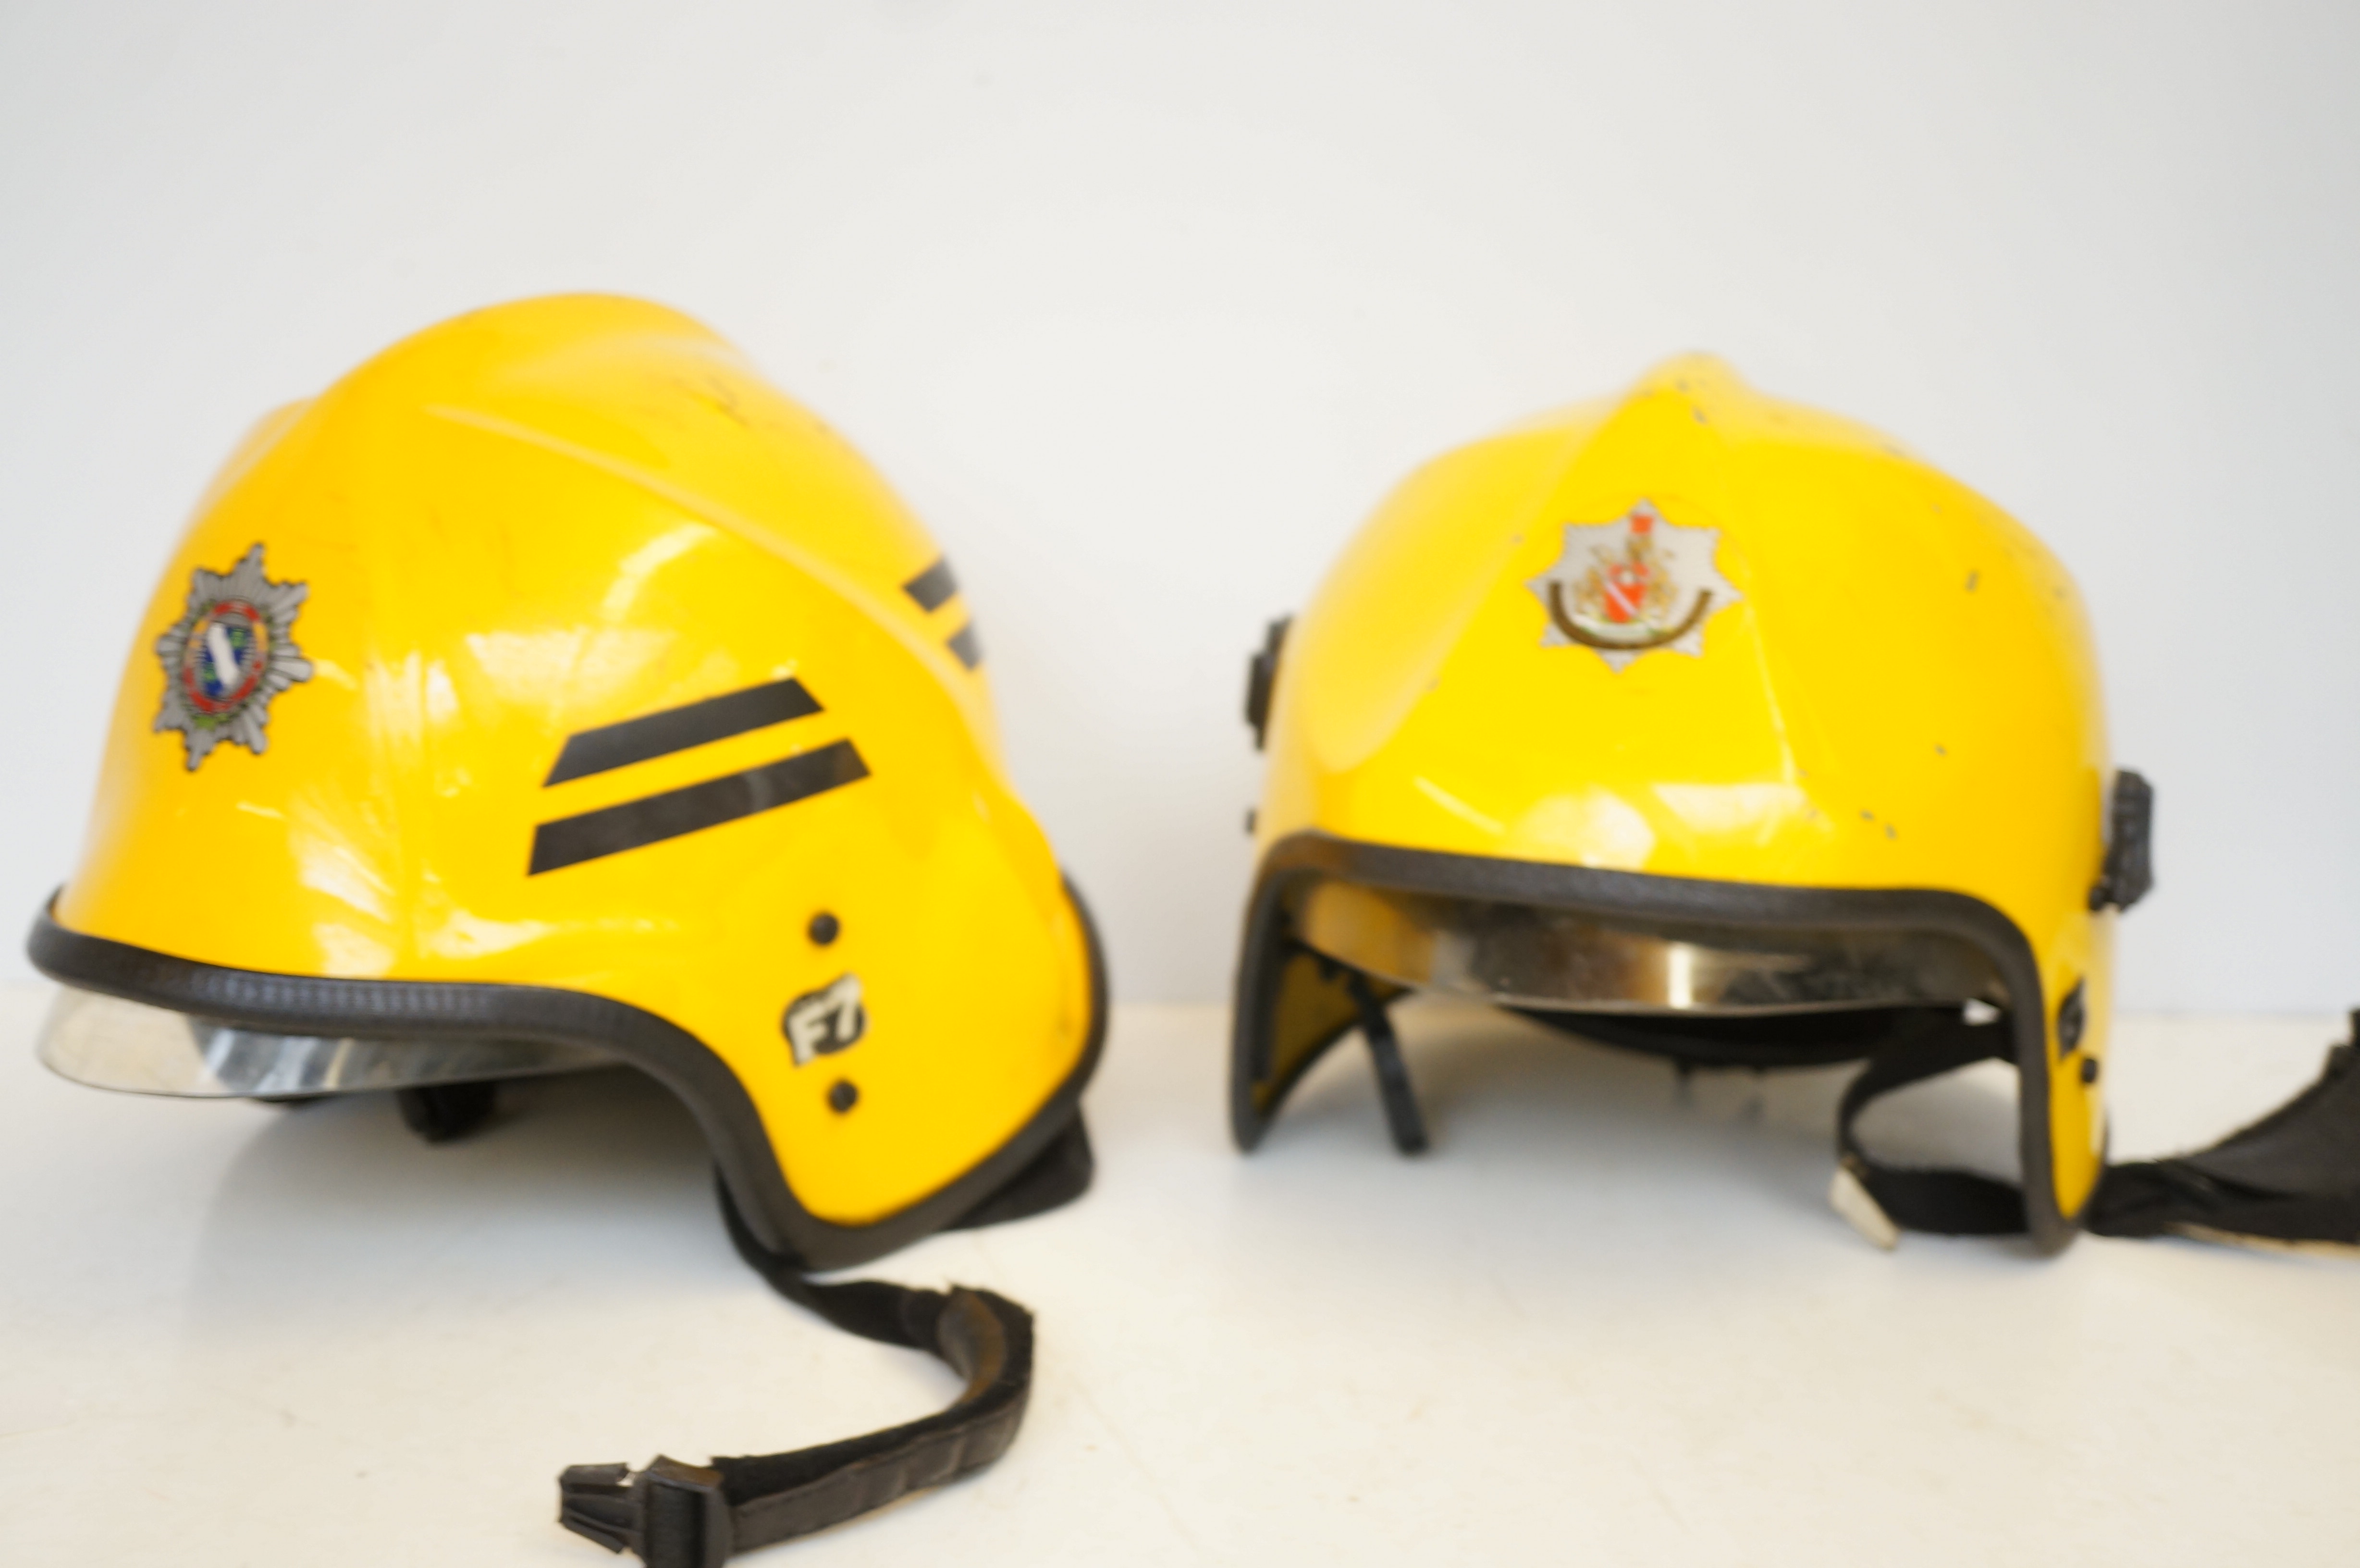 Greater manchester fire & rescue service x2 helmet